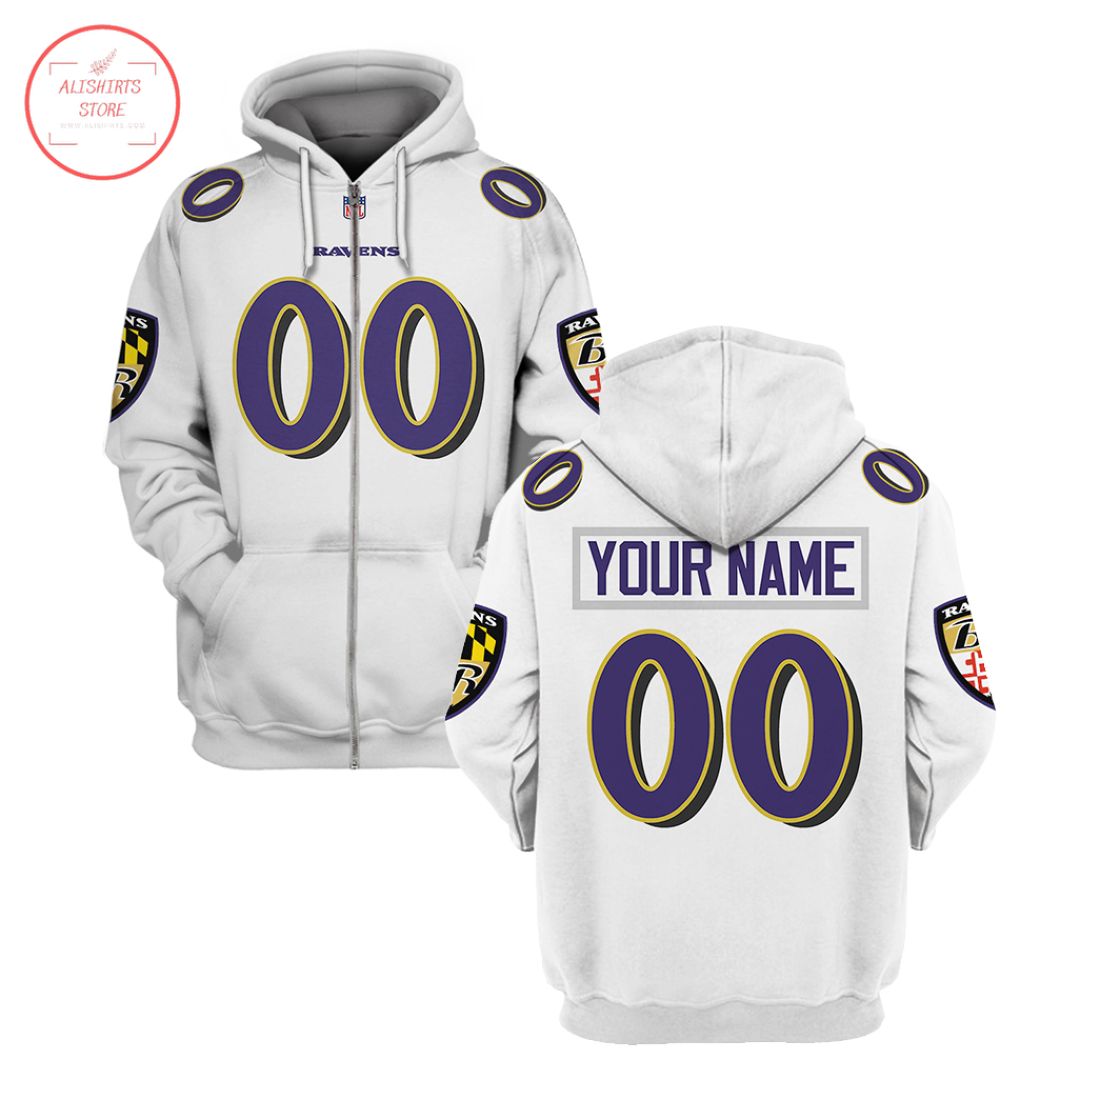 NFL Baltimore Ravens Personalized White Shirt and Hoodie